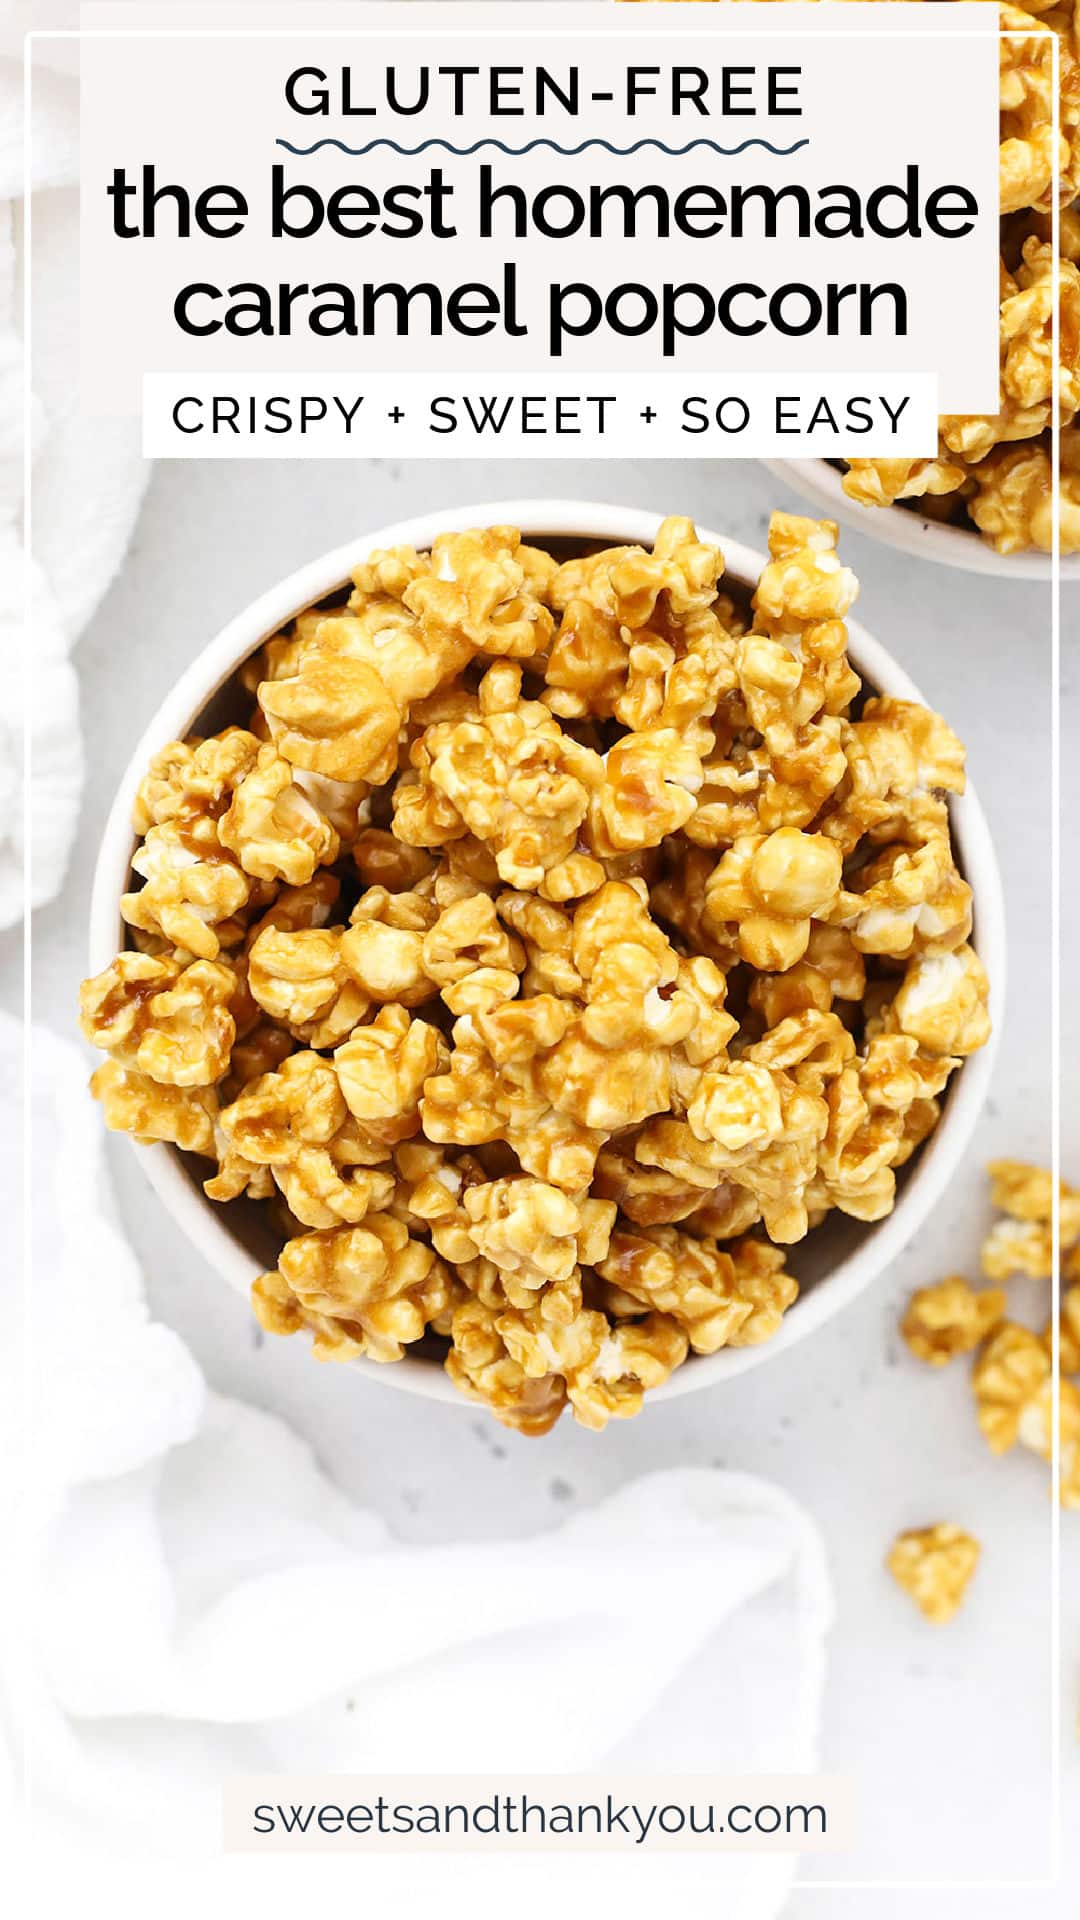 The BEST Caramel Popcorn - This easy homemade caramel corn recipe can be made crispy or gooey. You'll LOVE the incredible flavor! / easy caramel popcorn recipe / homemade caramel popcorn / crunchy caramel popcorn / crispy caramel popcorn / easy caramel corn / the best caramel corn recipe / gluten free caramel corn / gluten free caramel popcorn /